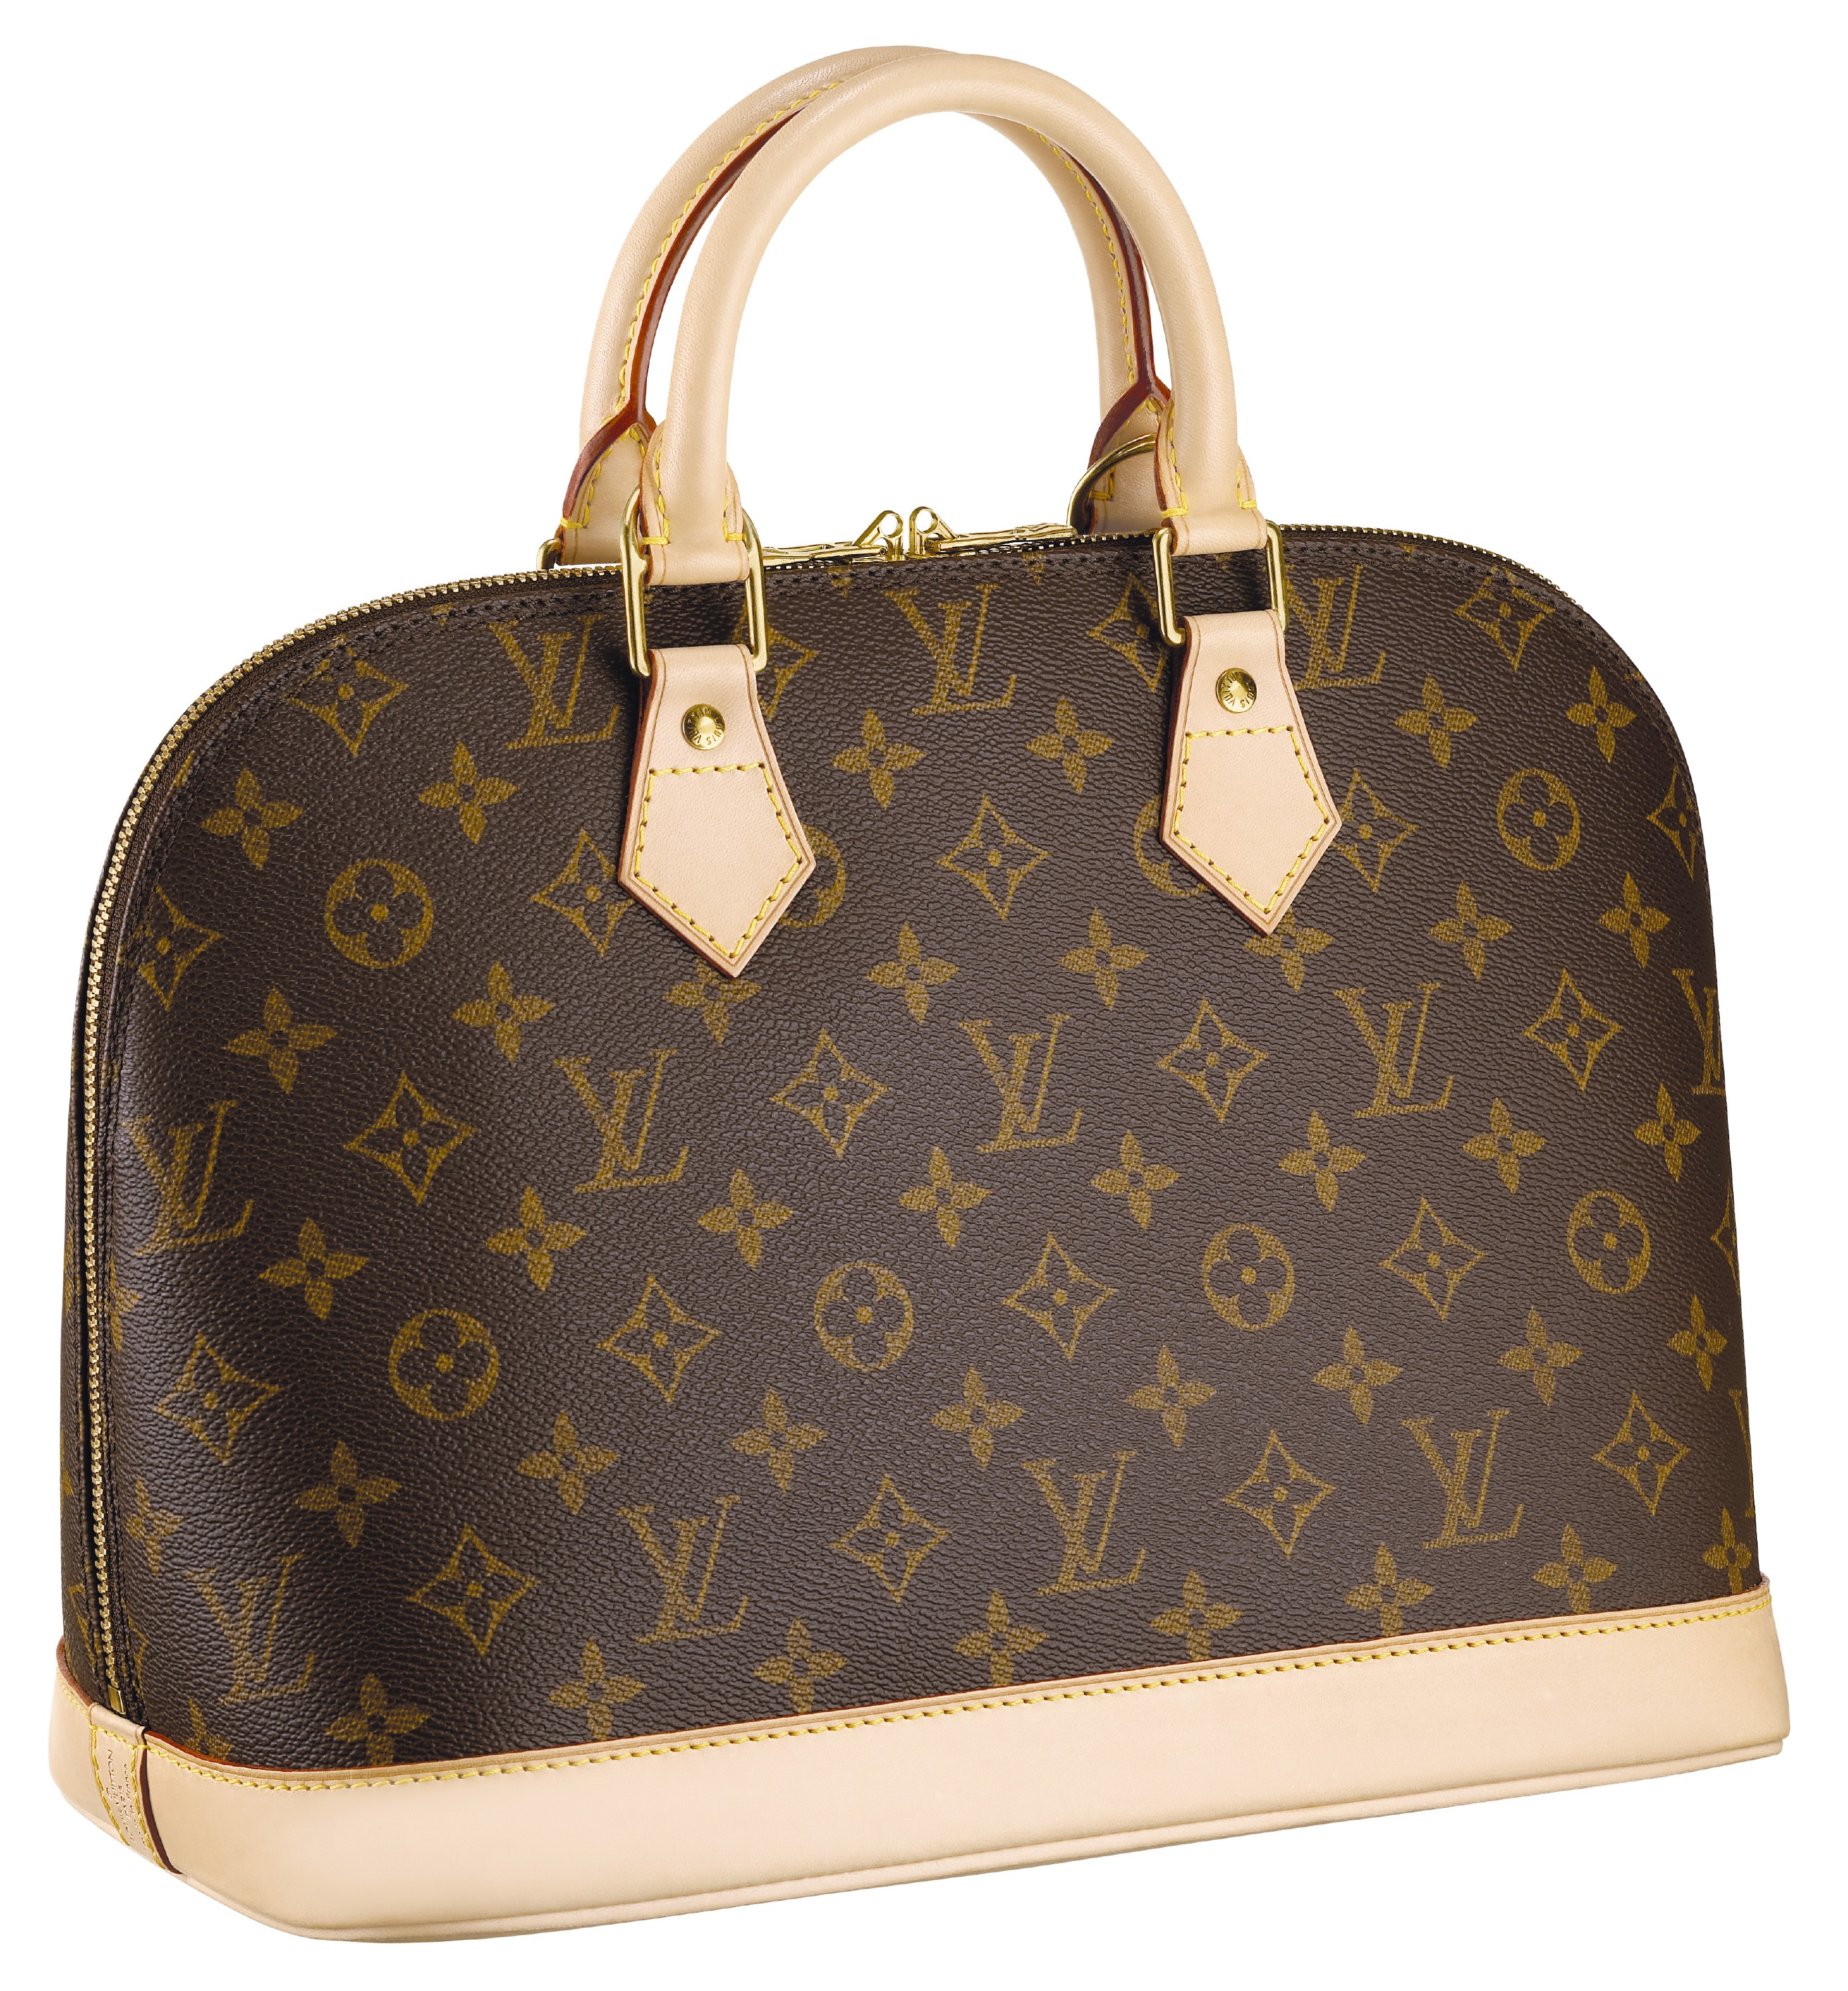 Louis Vuitton Celebrates 150 Years of Excellence in Savoir-Faire With a Special Tribute to the ...